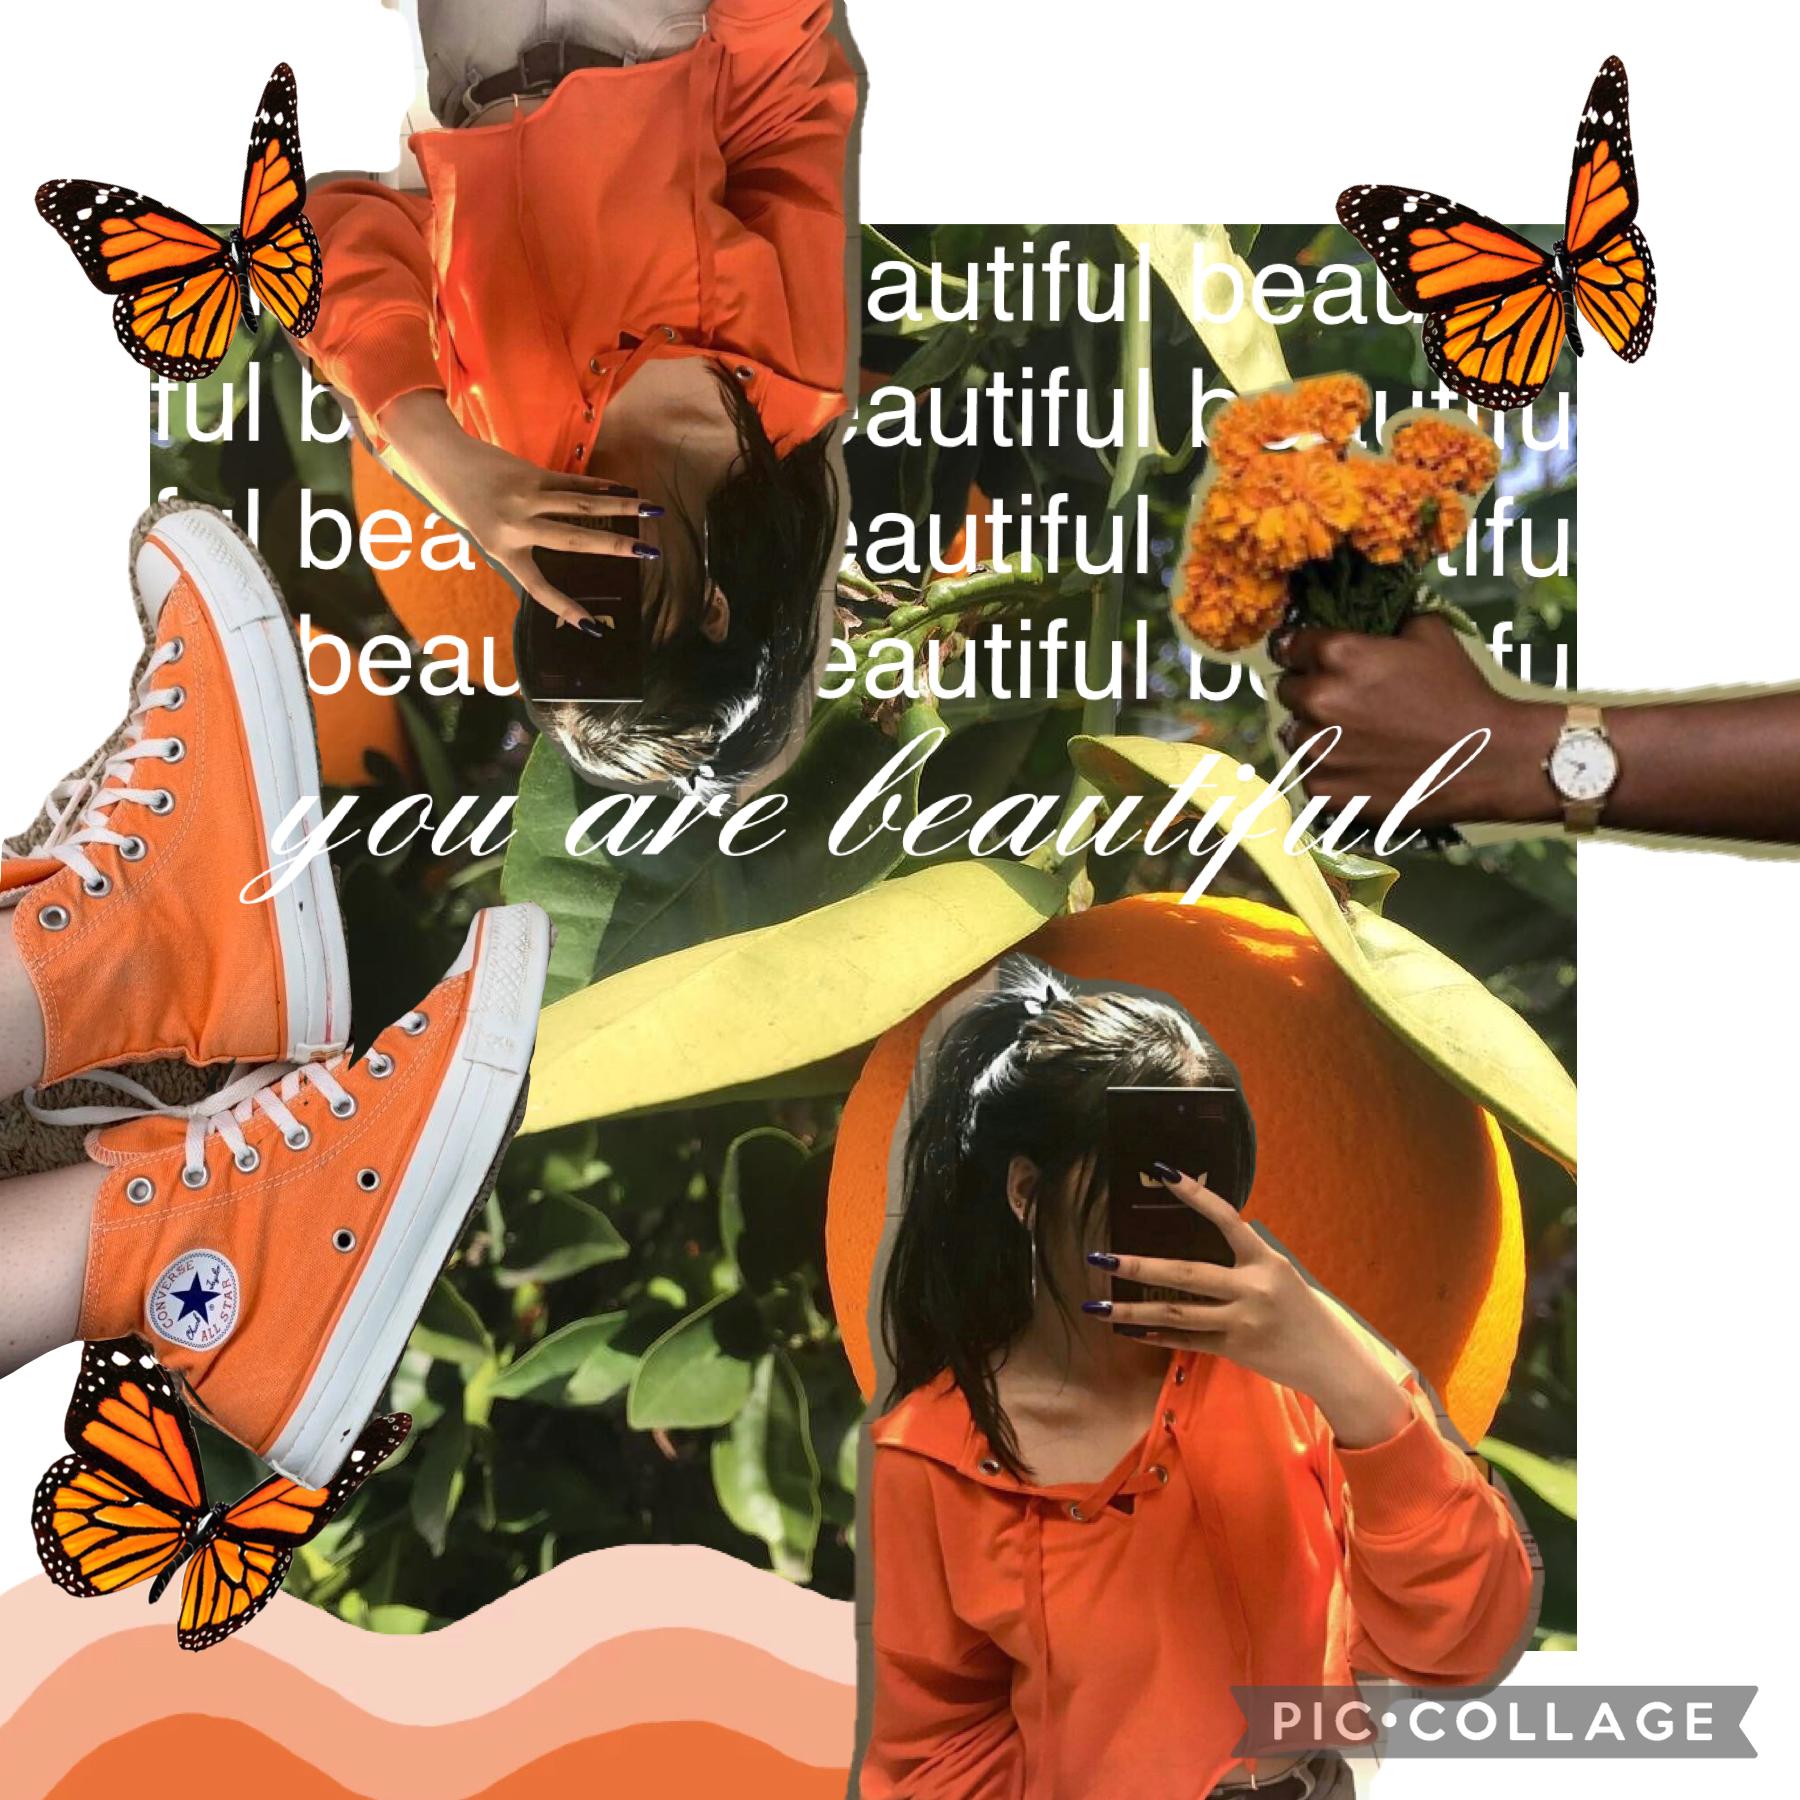 🍊4/17/22🍊
Orange 🧡 If you guys know the colors of the rainbow (which you should, I am concerned of you don’t) tomorrow is yellow. Remember you are beautiful!